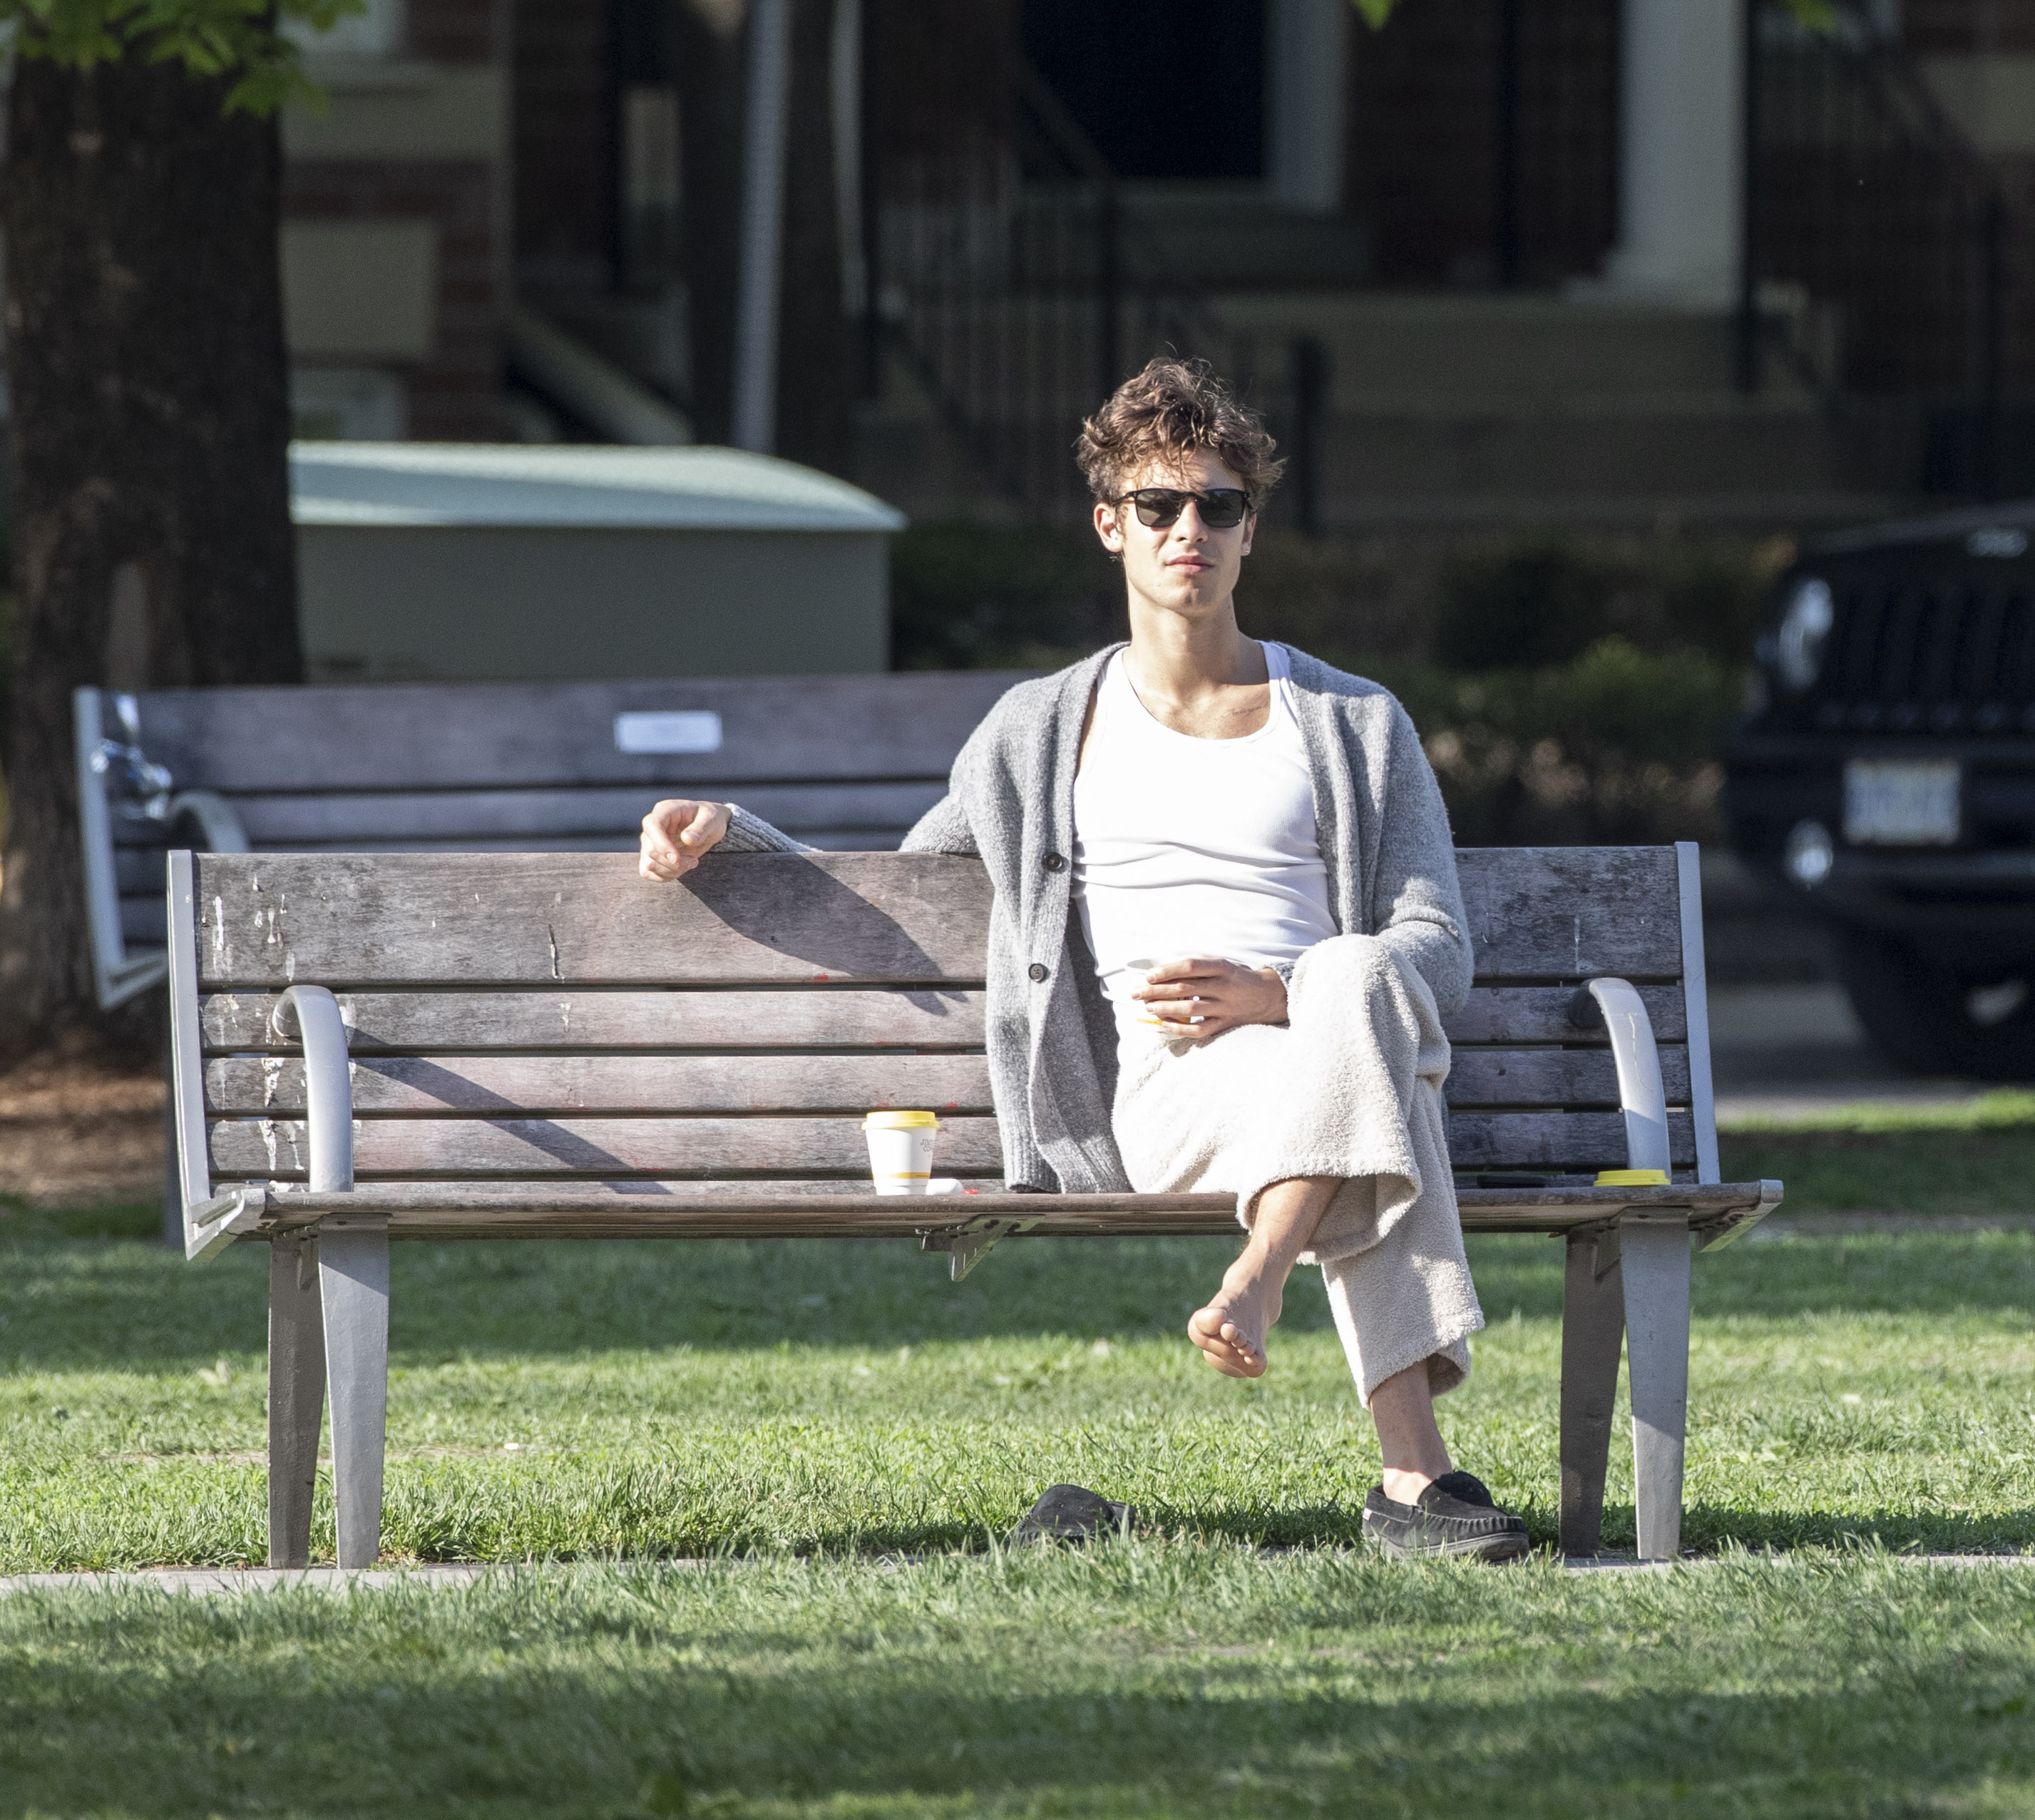 Shawn Mendes enjoyed a day outdoors in a park in Toronto, Canada.  The artist sat on a bench to wait for a friend he met.  He wore white faux lambskin pants, a classic t-shirt and a gray wool sweater.